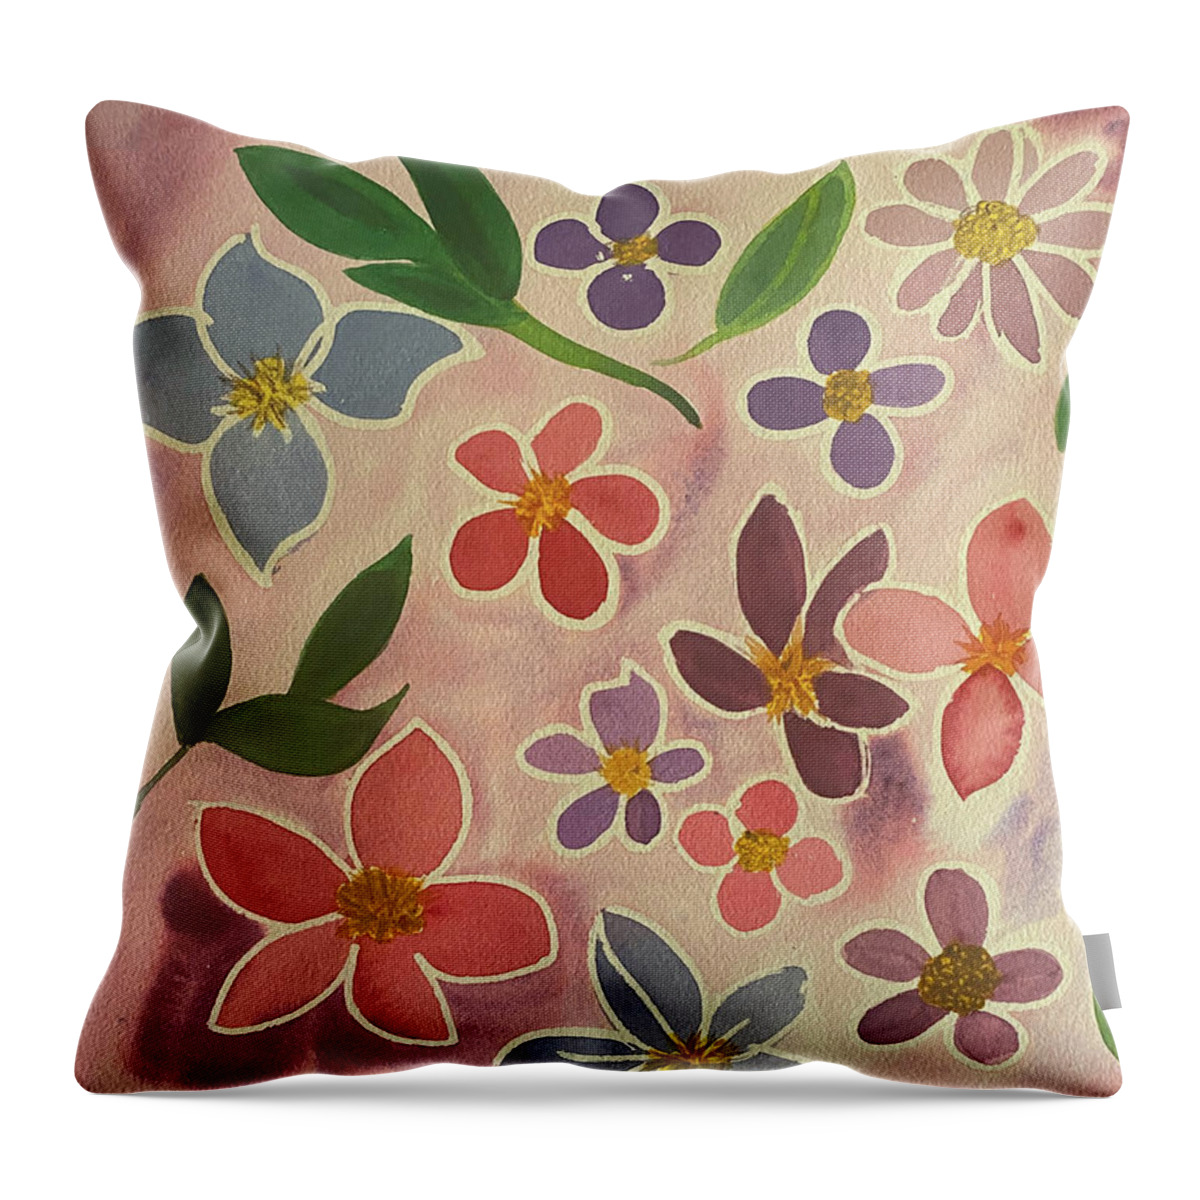 Flowers Throw Pillow featuring the painting Flower Doodles by Lisa Neuman